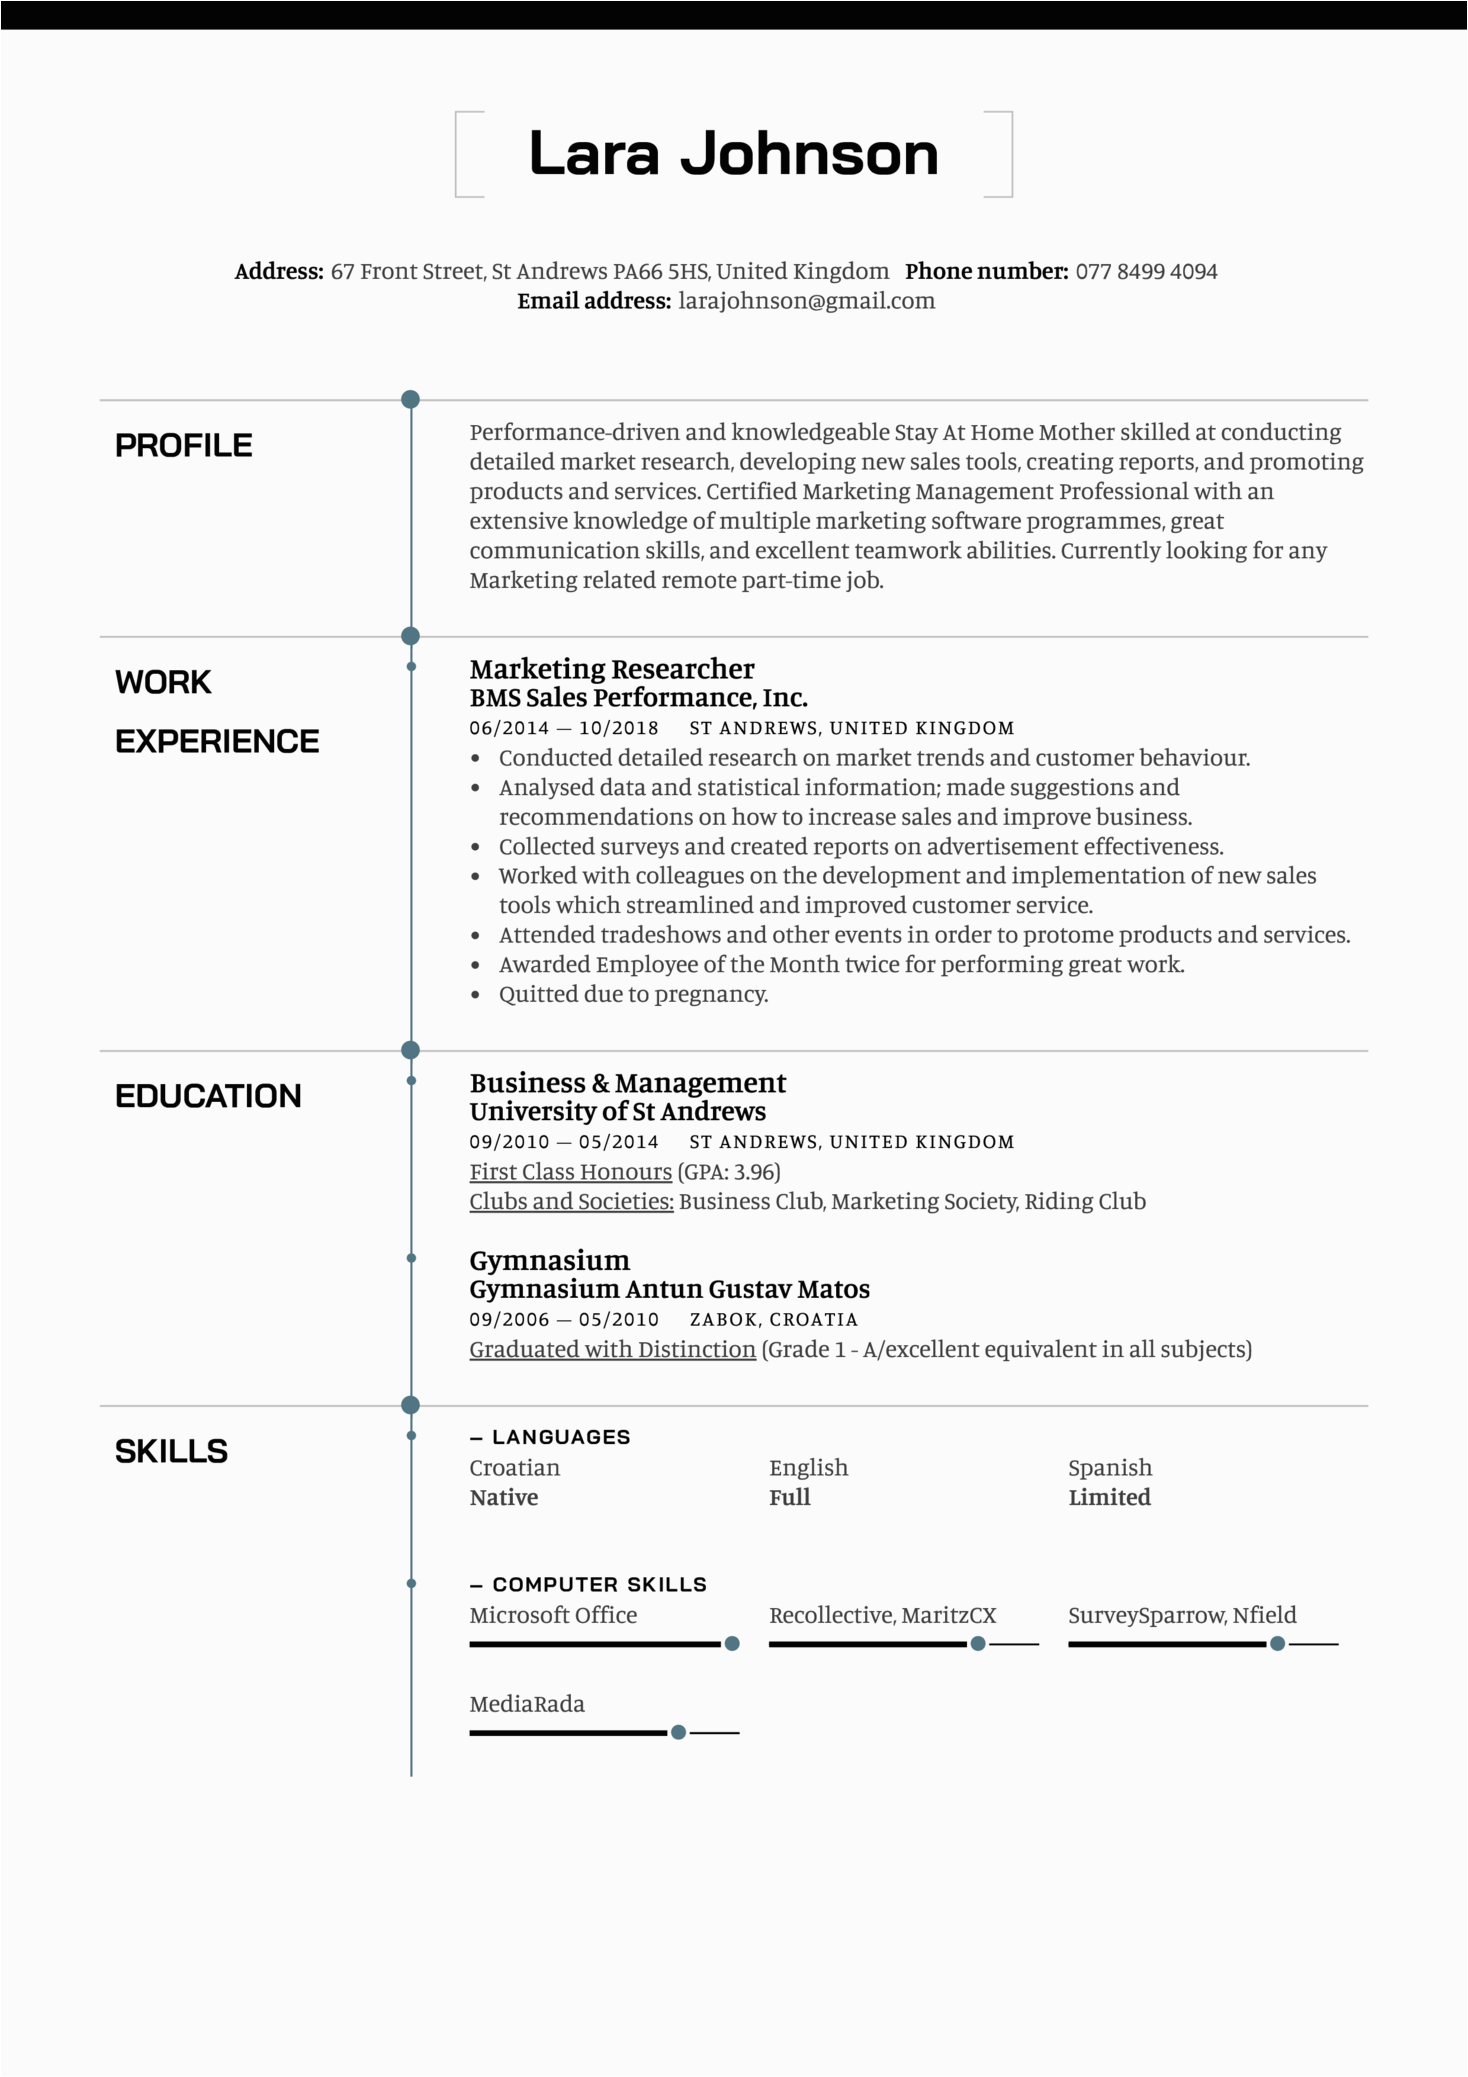 Resume Profile Samples for Stay at Home Moms Stay at Home Mother Resume Example